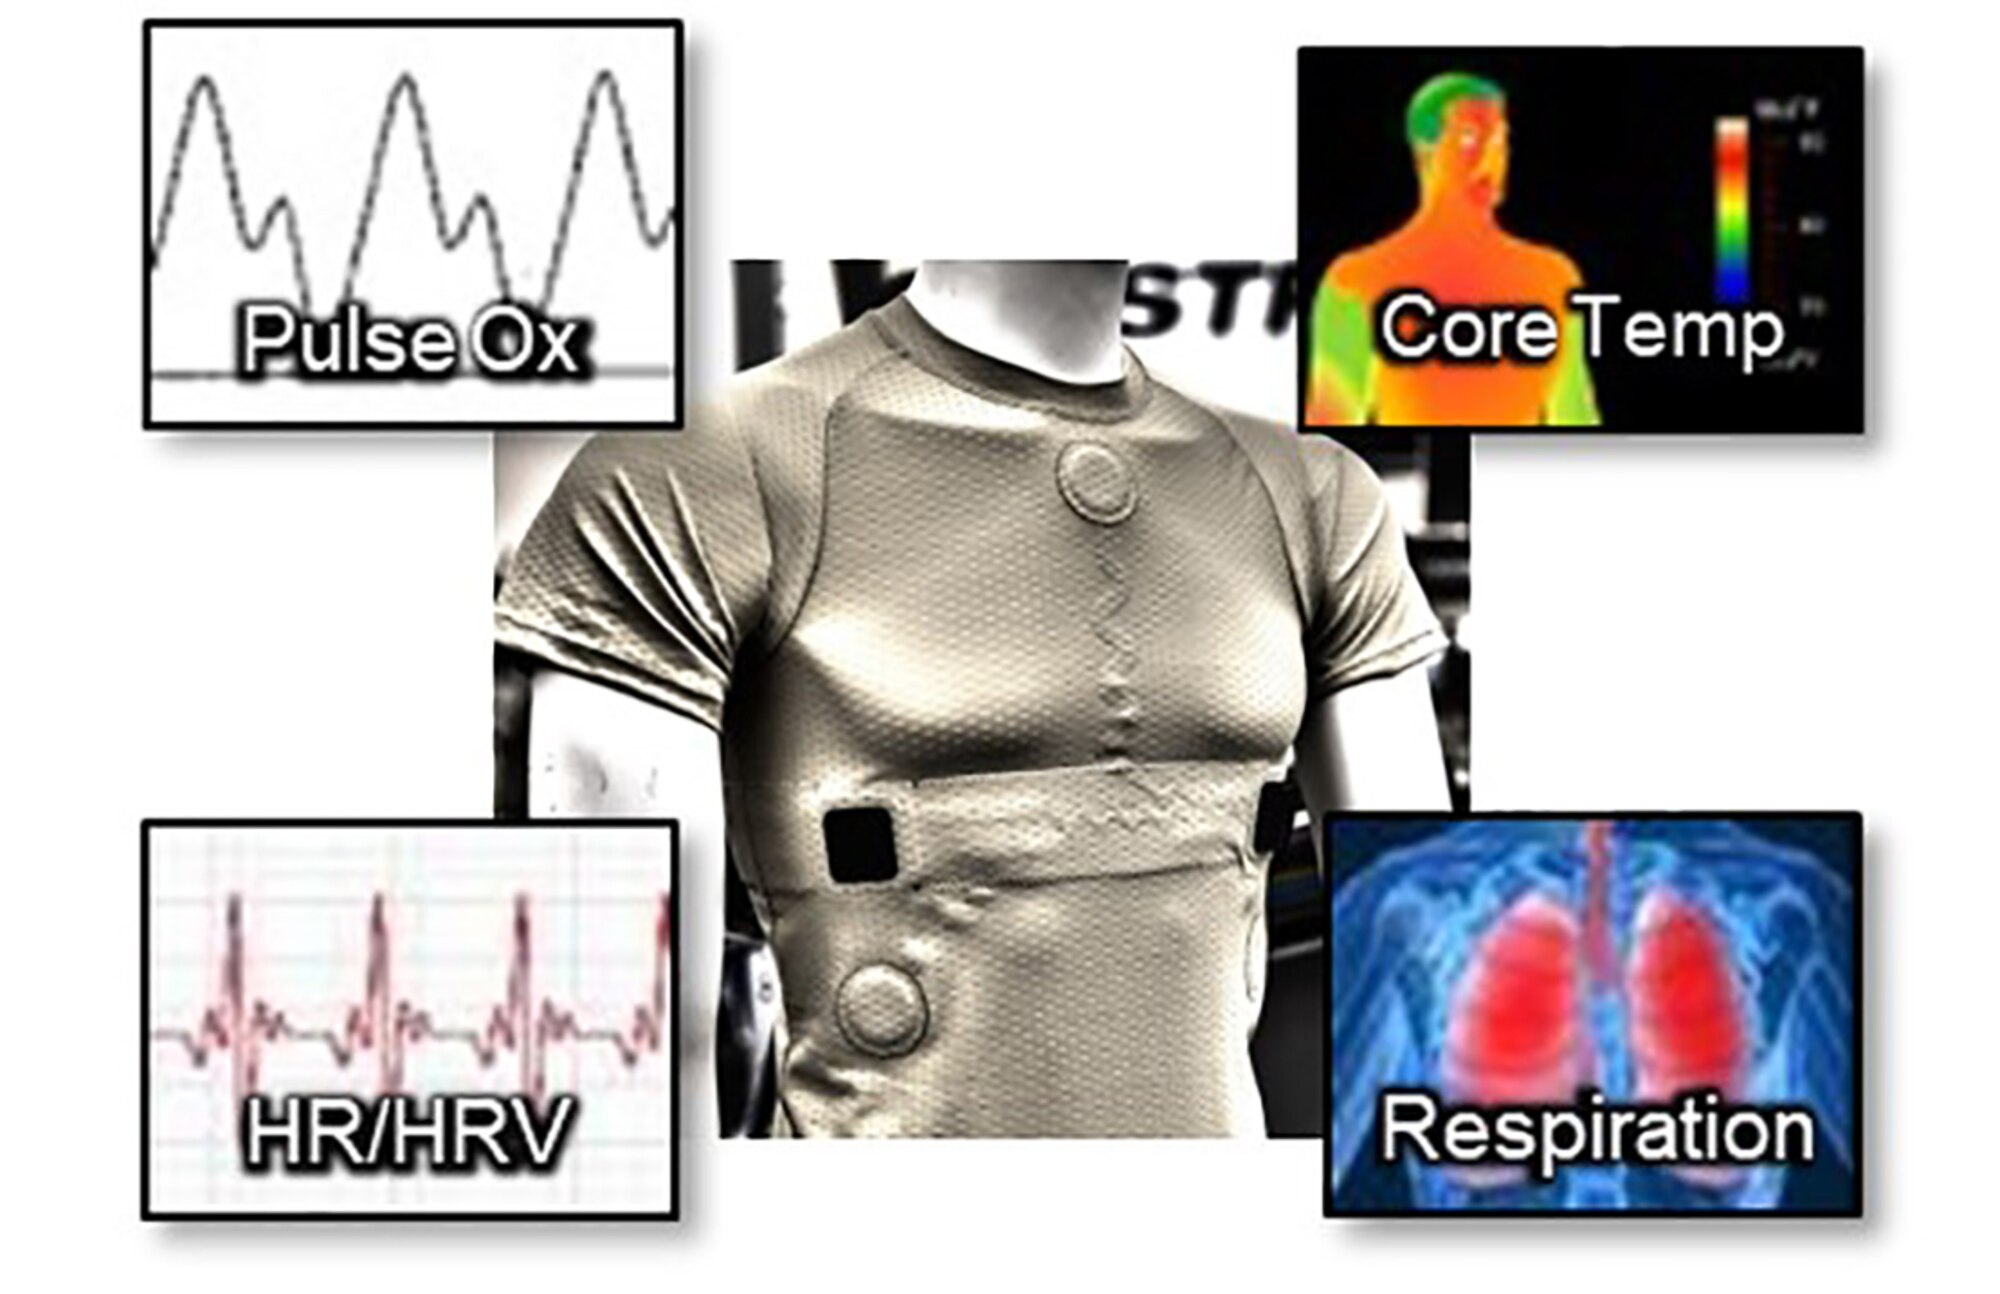 PHYSIO is an Air Force Research Laboratory project executed through NextFlex that aims at creating next-generation flight-suit technology for Air Force pilots with a compressed garment containing integrated biometric sensors. PHYSIO enables physiological monitoring of pilots. (Courtesy graphic)